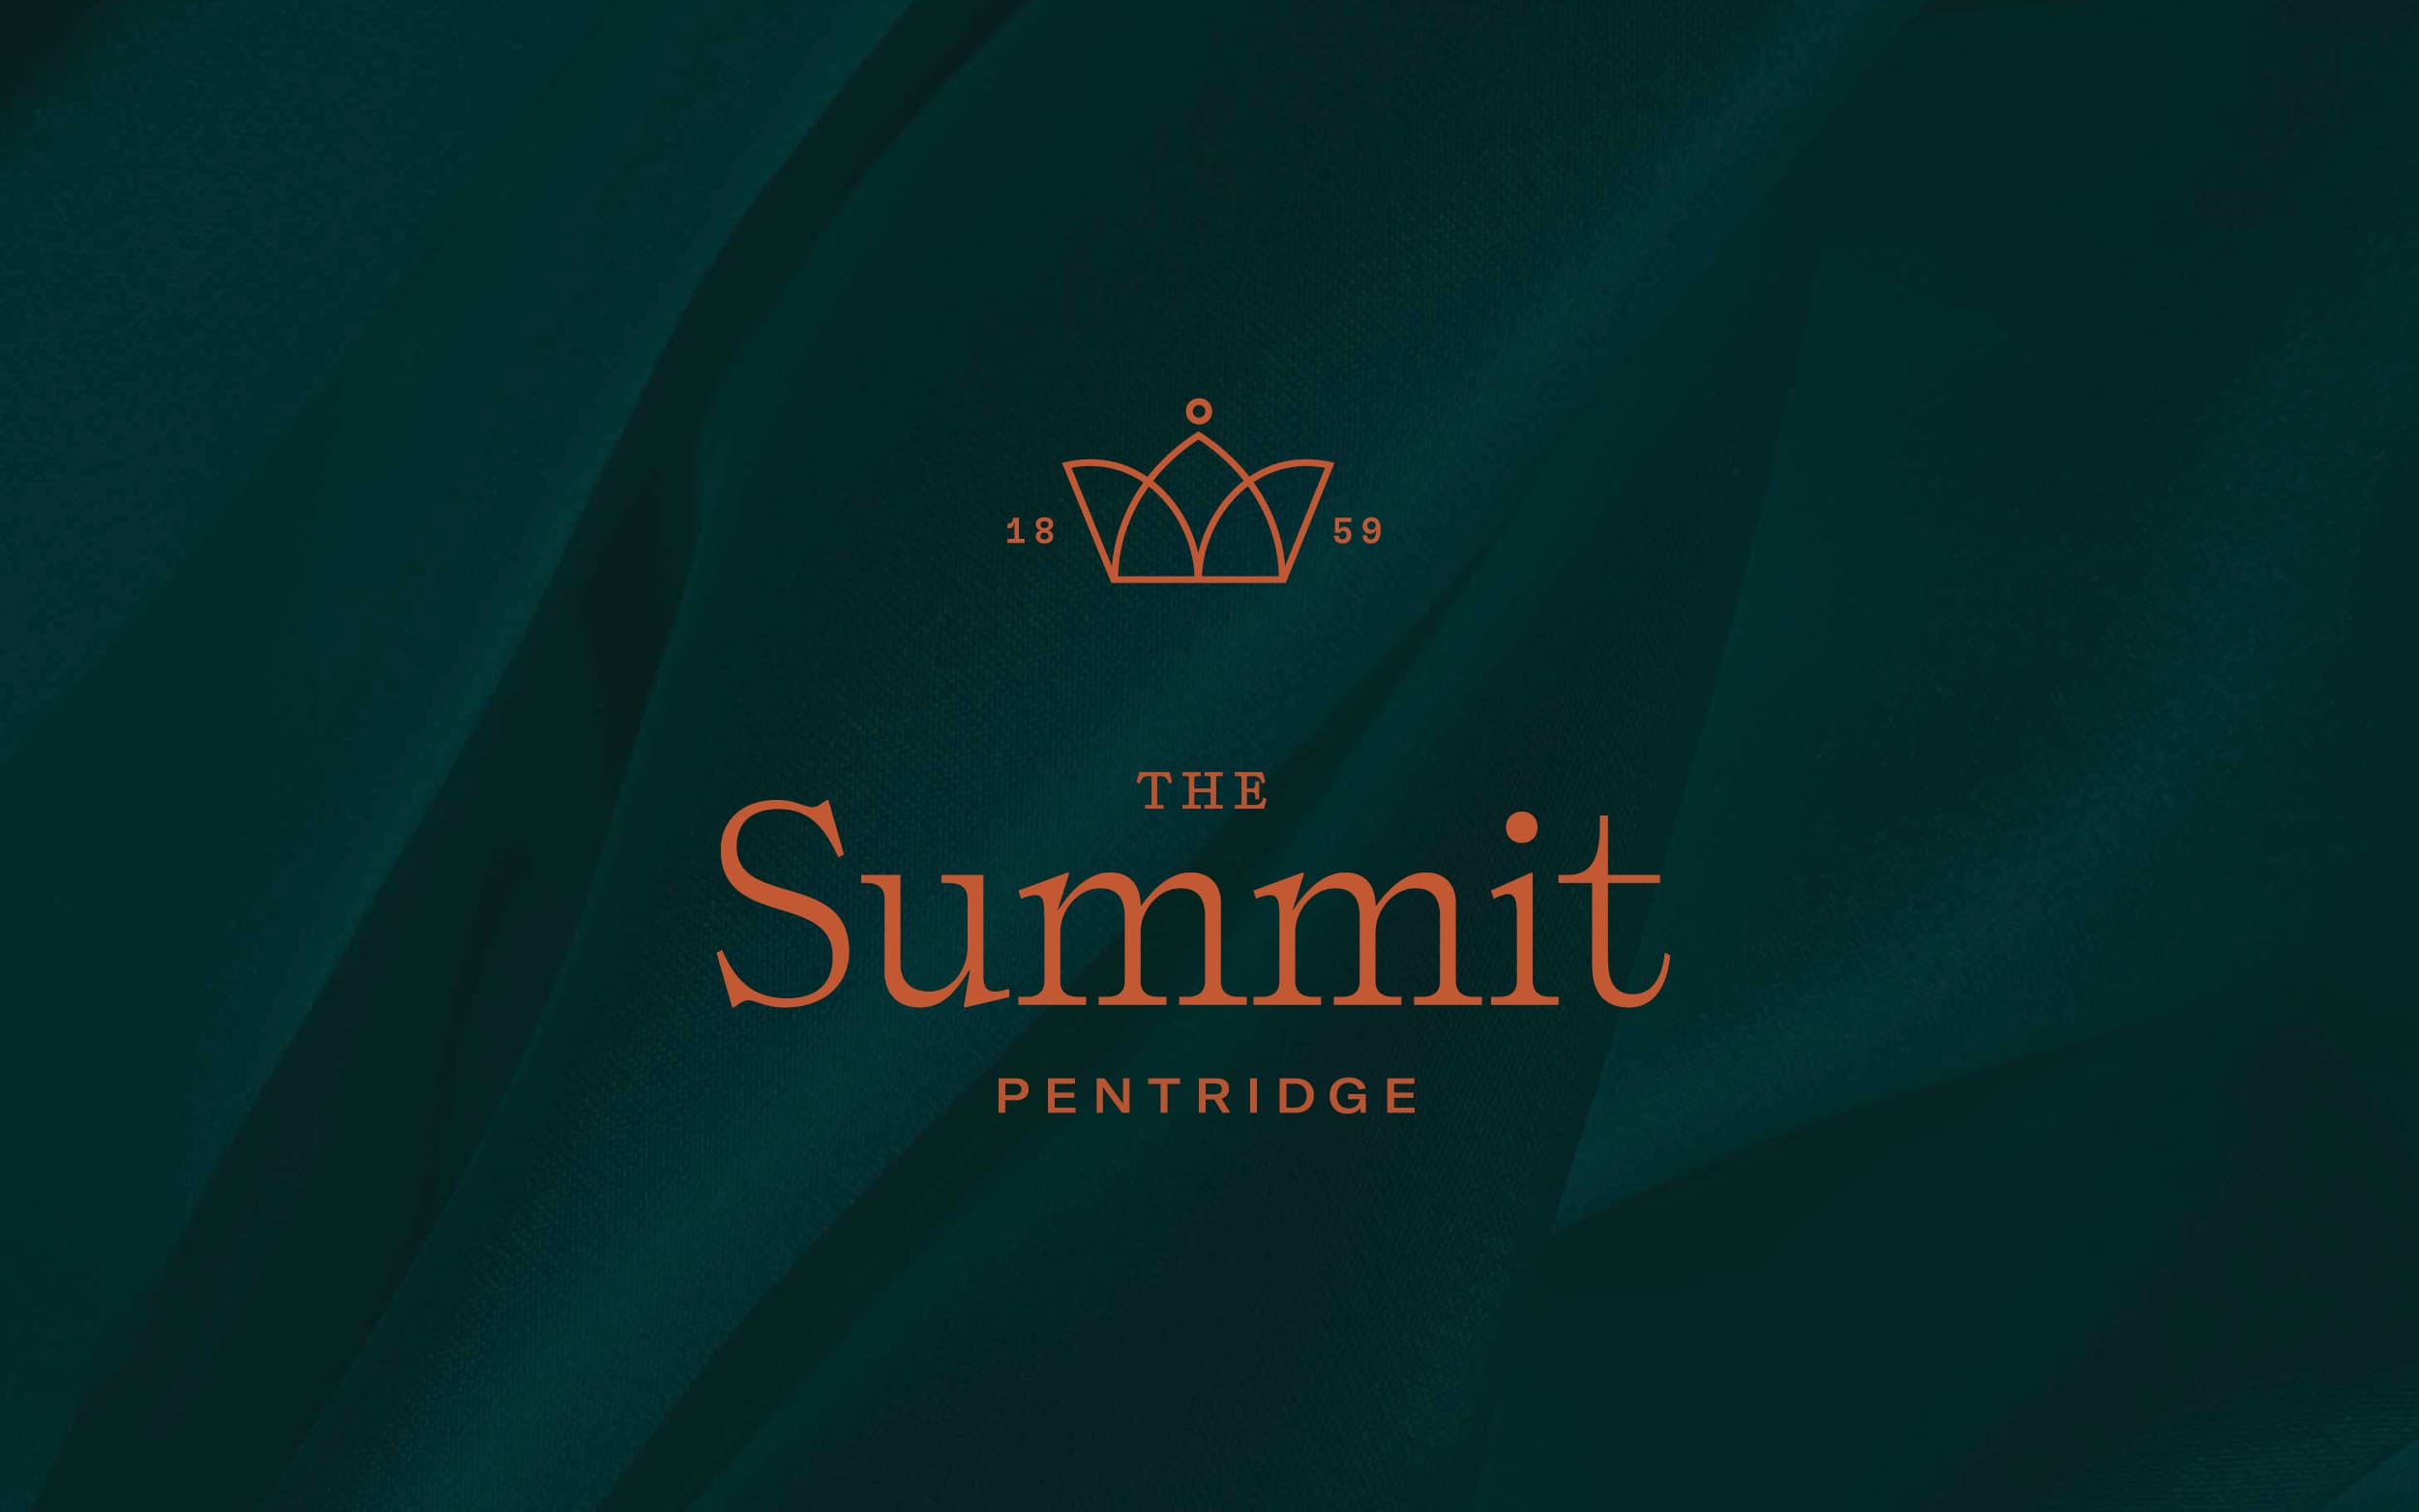 The Summit logo on green fabric background